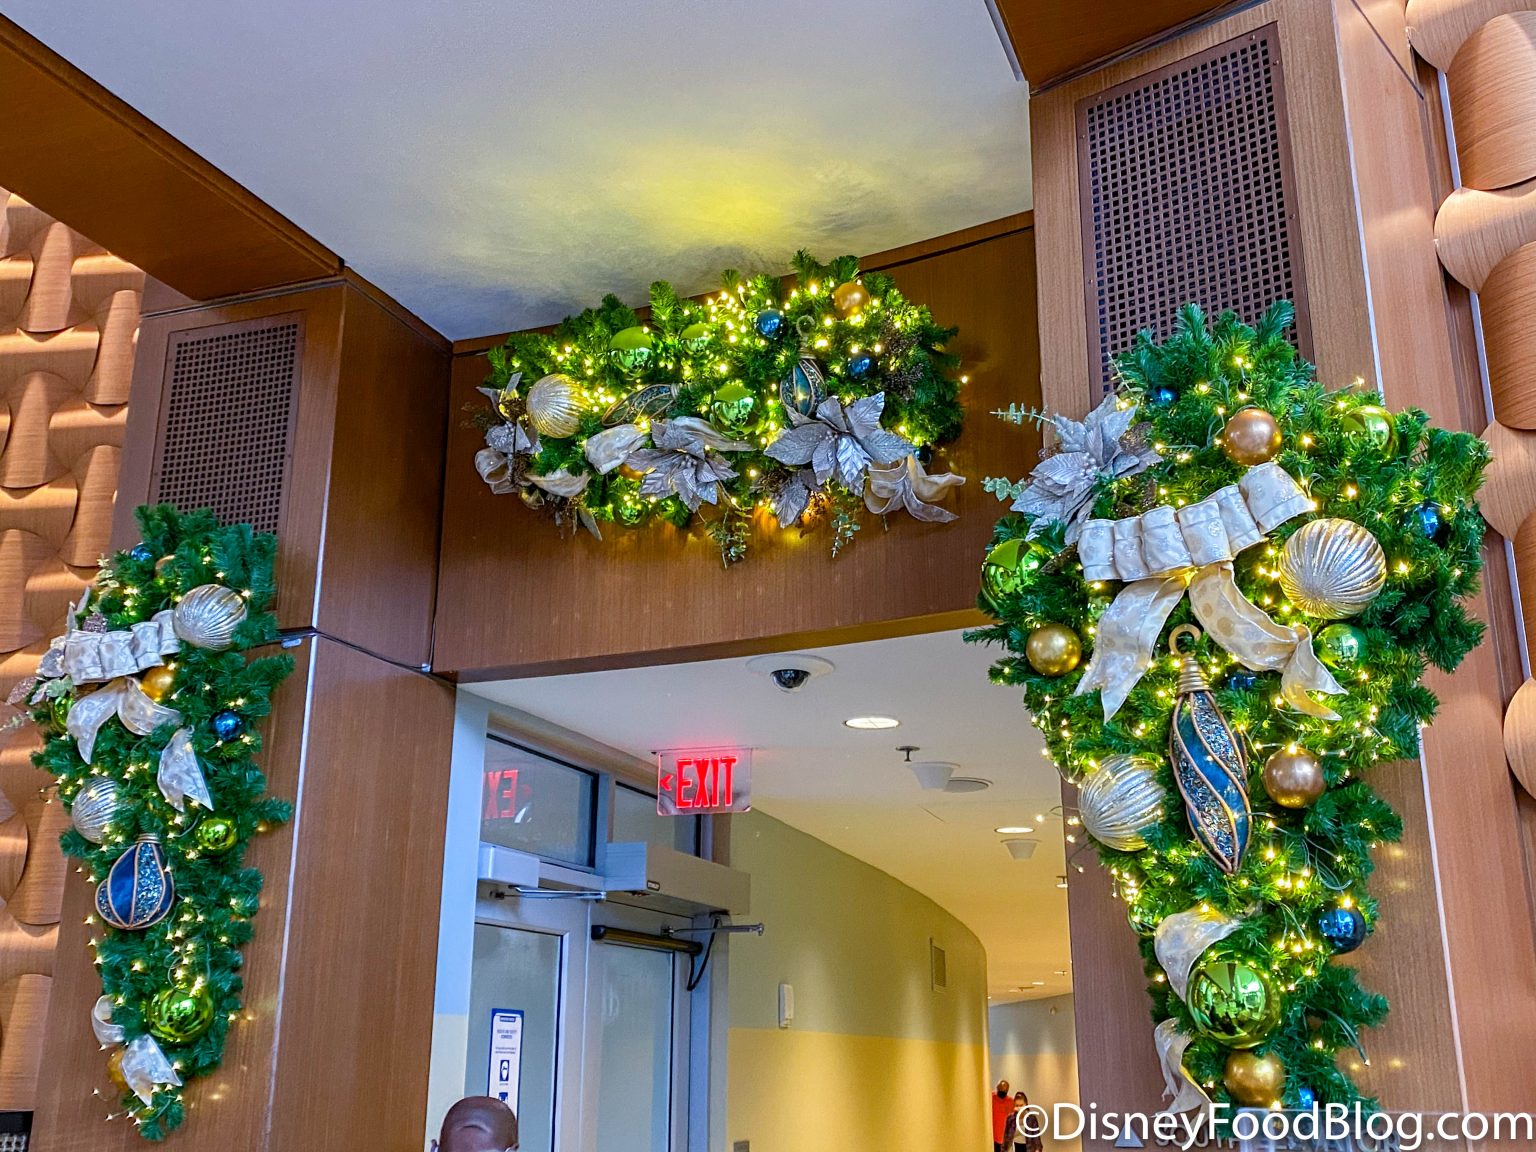 Festive Greenery Is Decorated in Wintery Colors